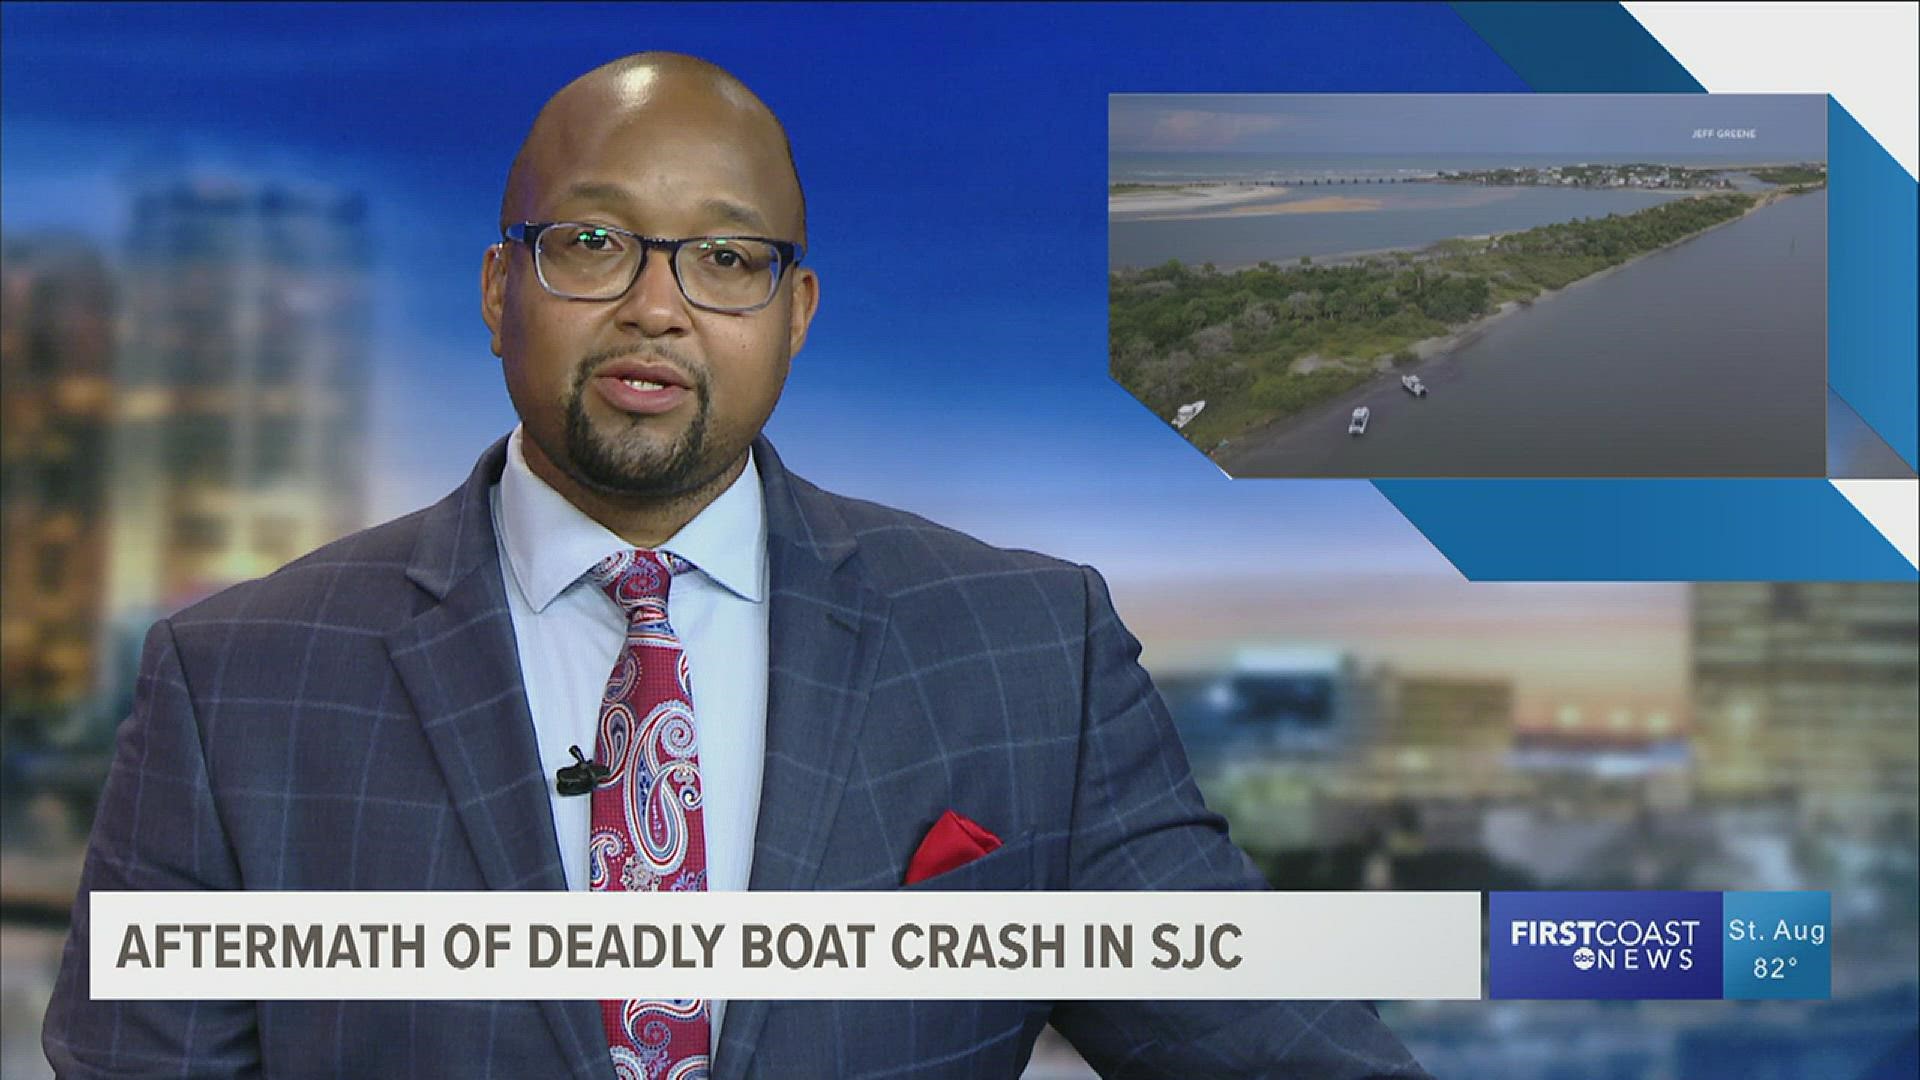 A boat with five people aboard crashed in St. Johns County, killing one.